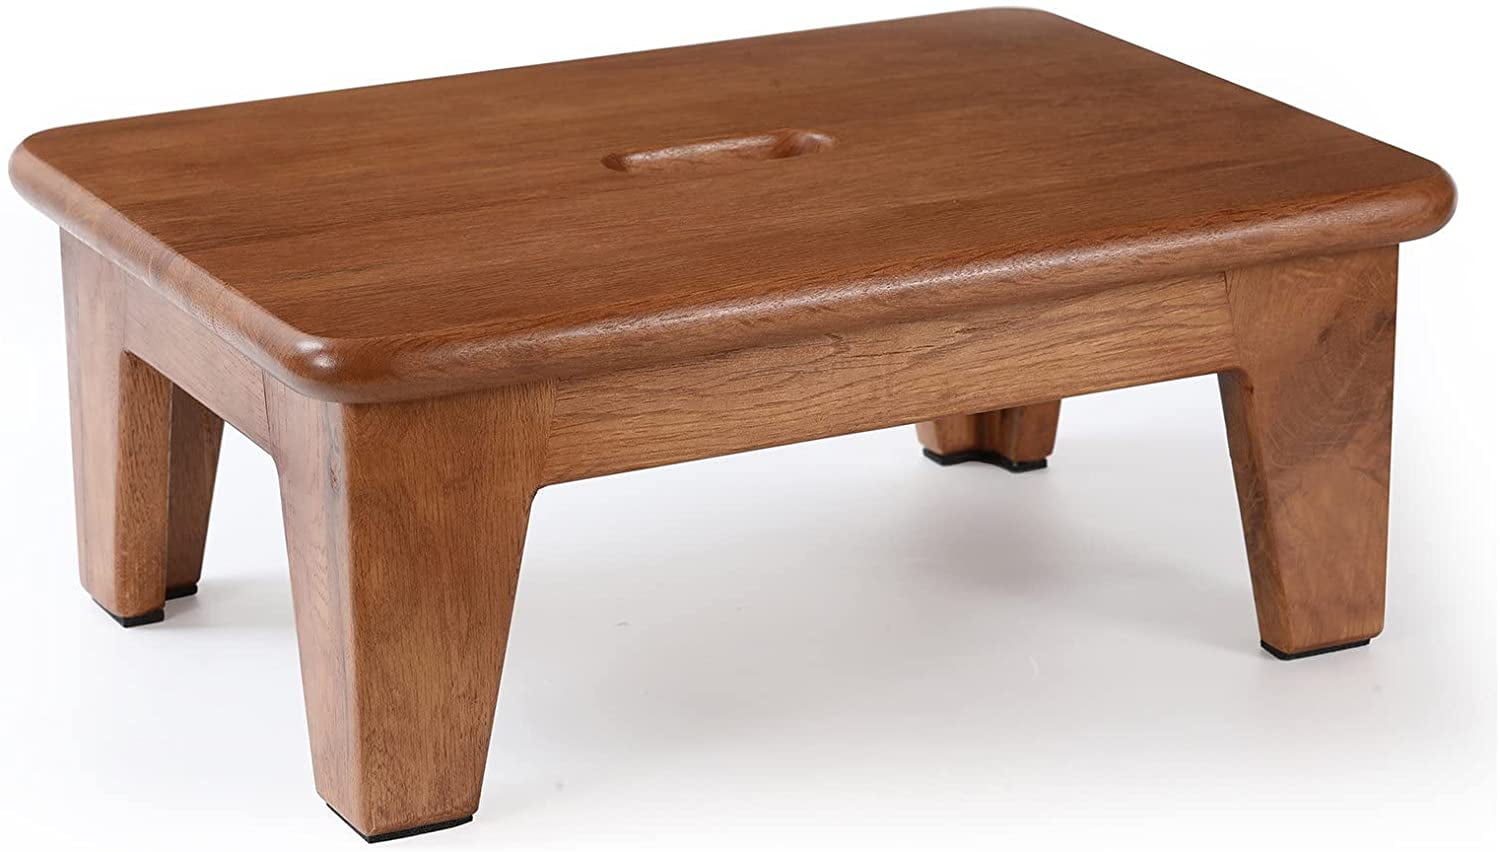 Wooden Foot Stool Small Stool With Non-Slip Pad High Beds Under